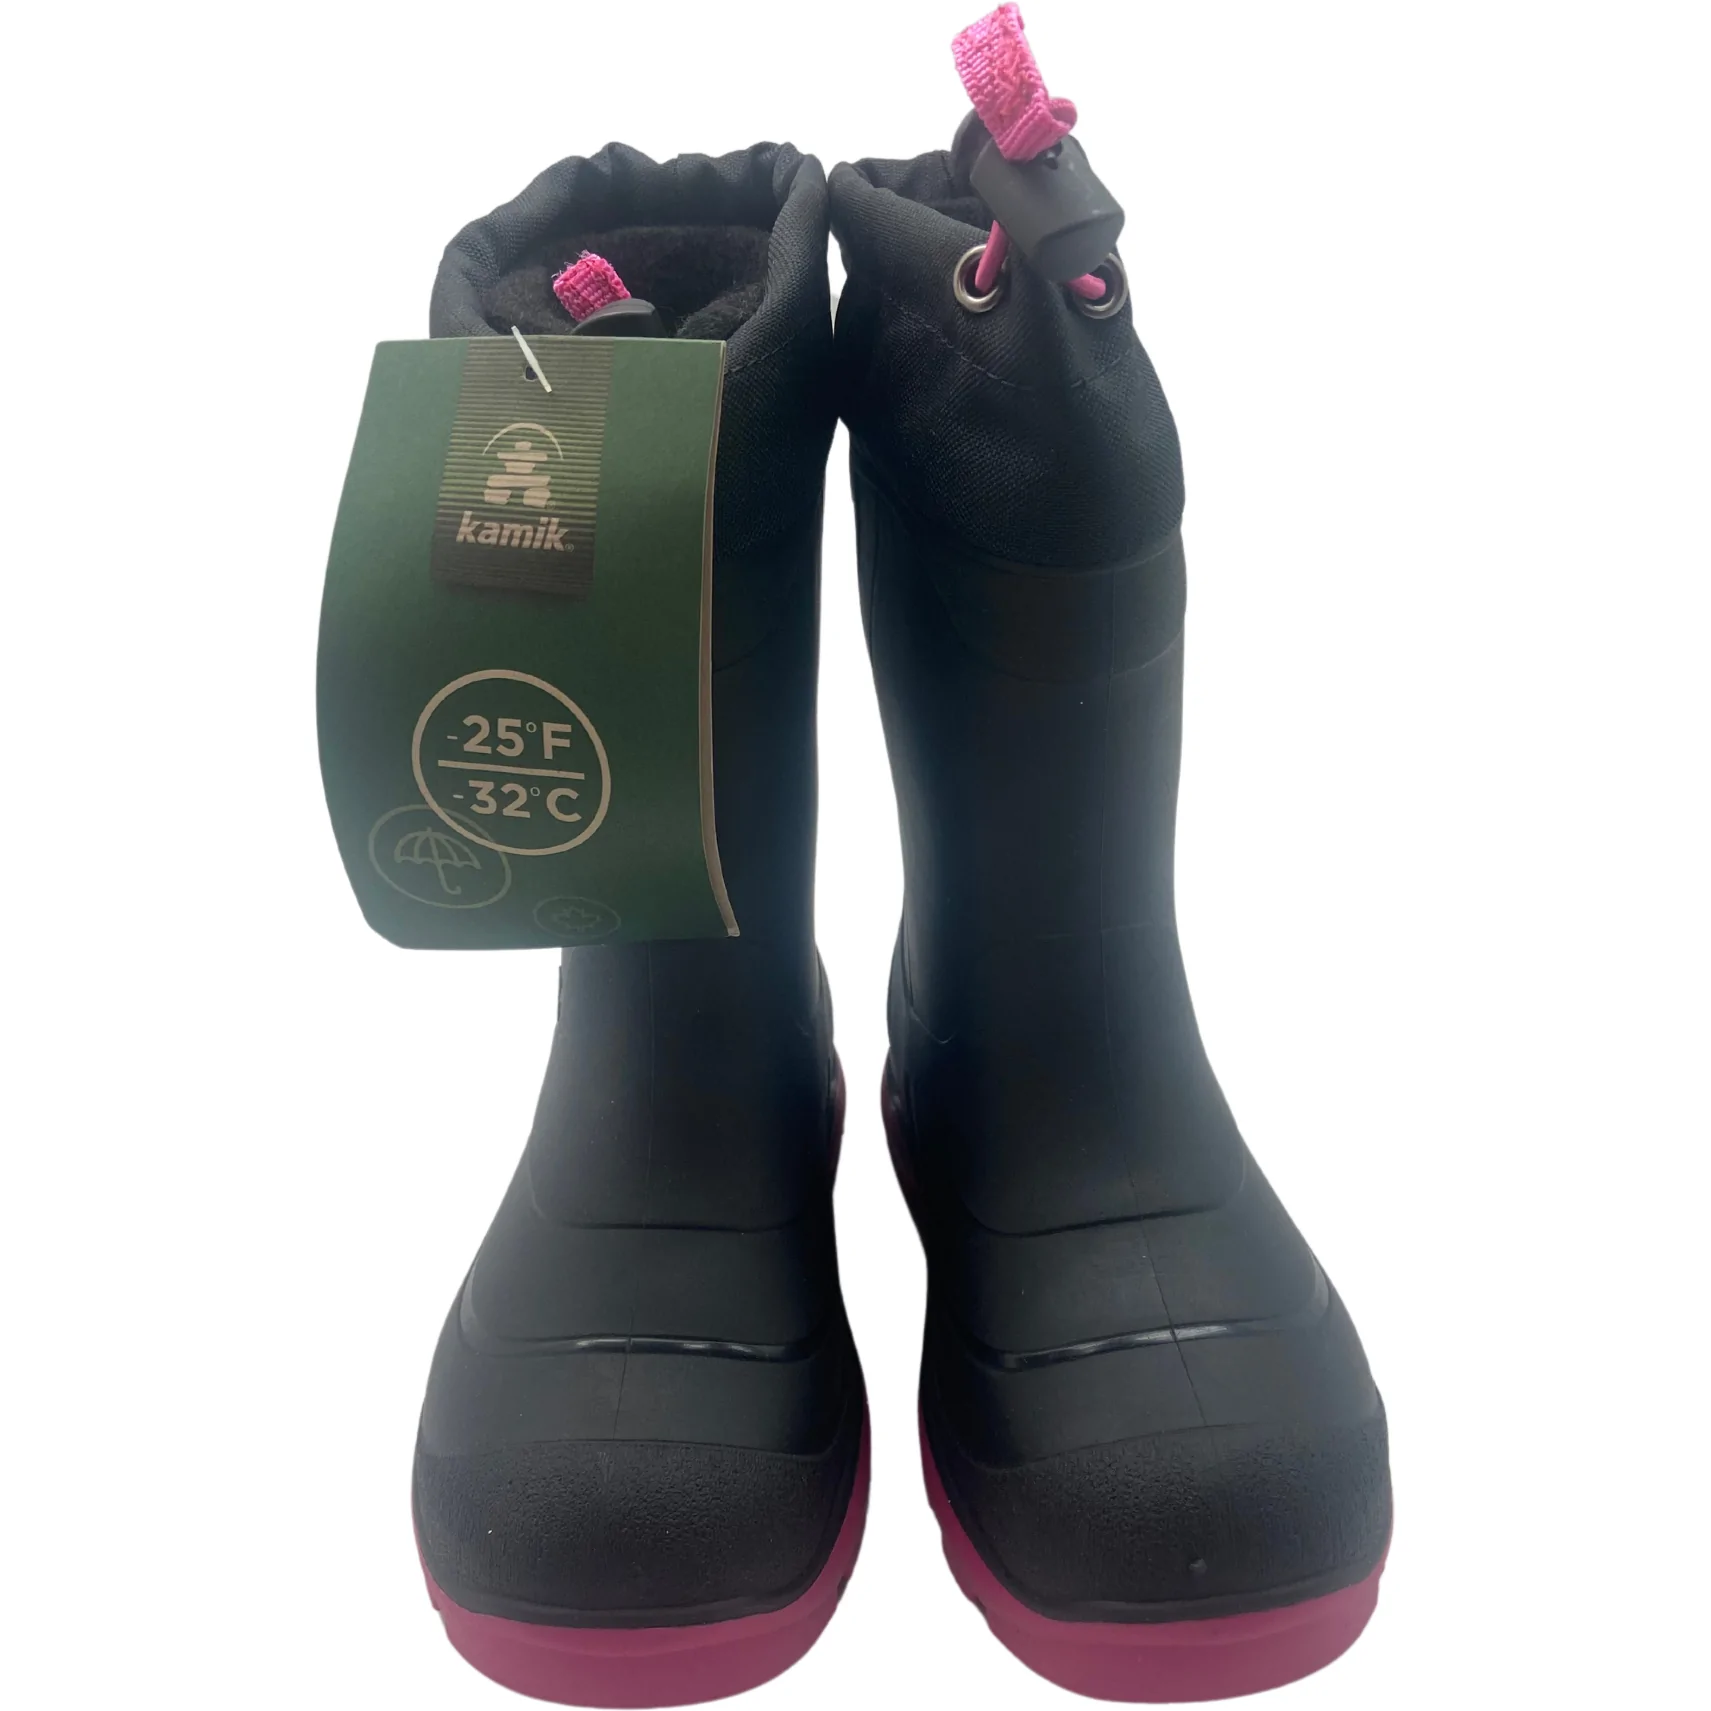 Kamik: Girl's Boots / Snow Boots / Snowbuster1 / Black / Pink / Size 9